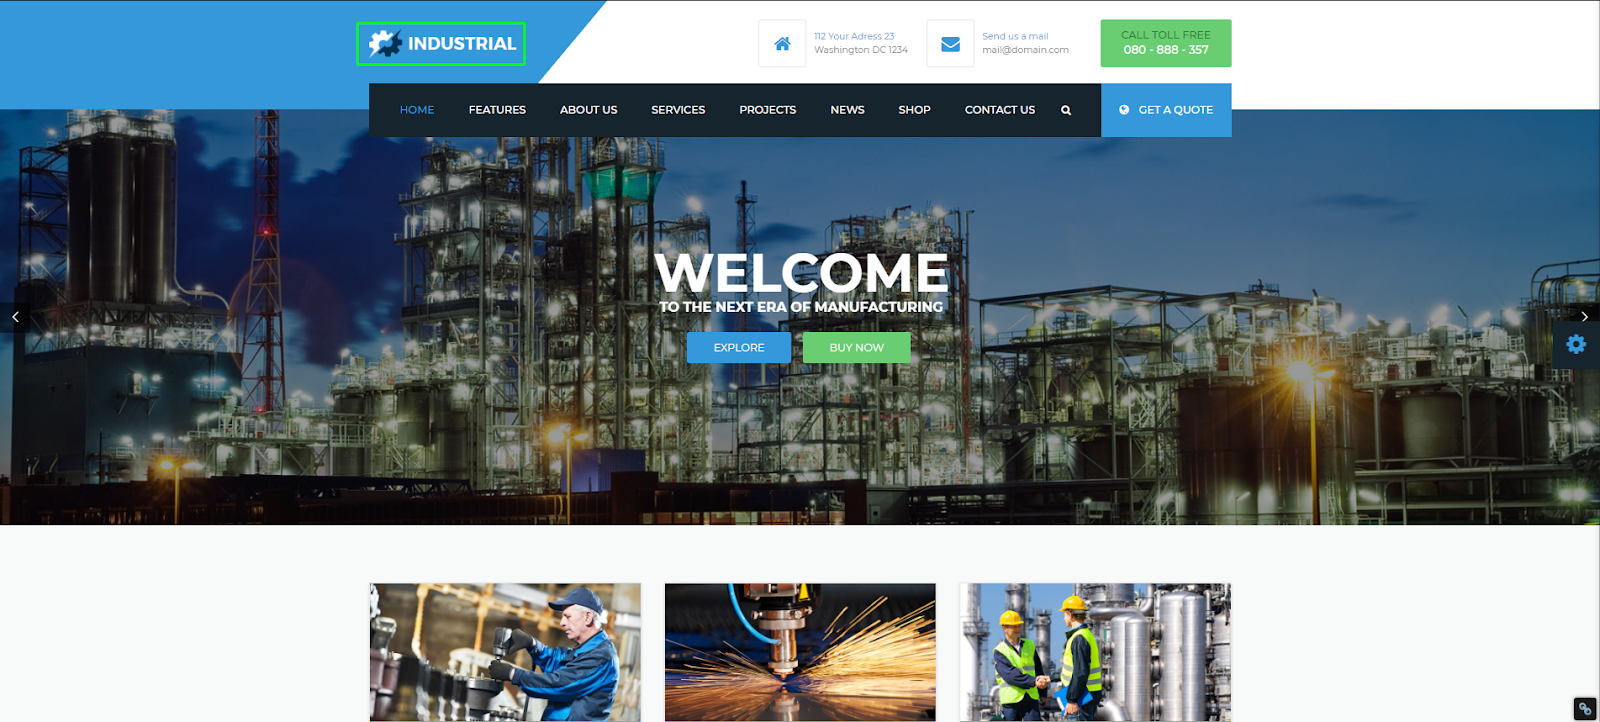 Industrial - Factory, Industry, and Business WordPress Theme